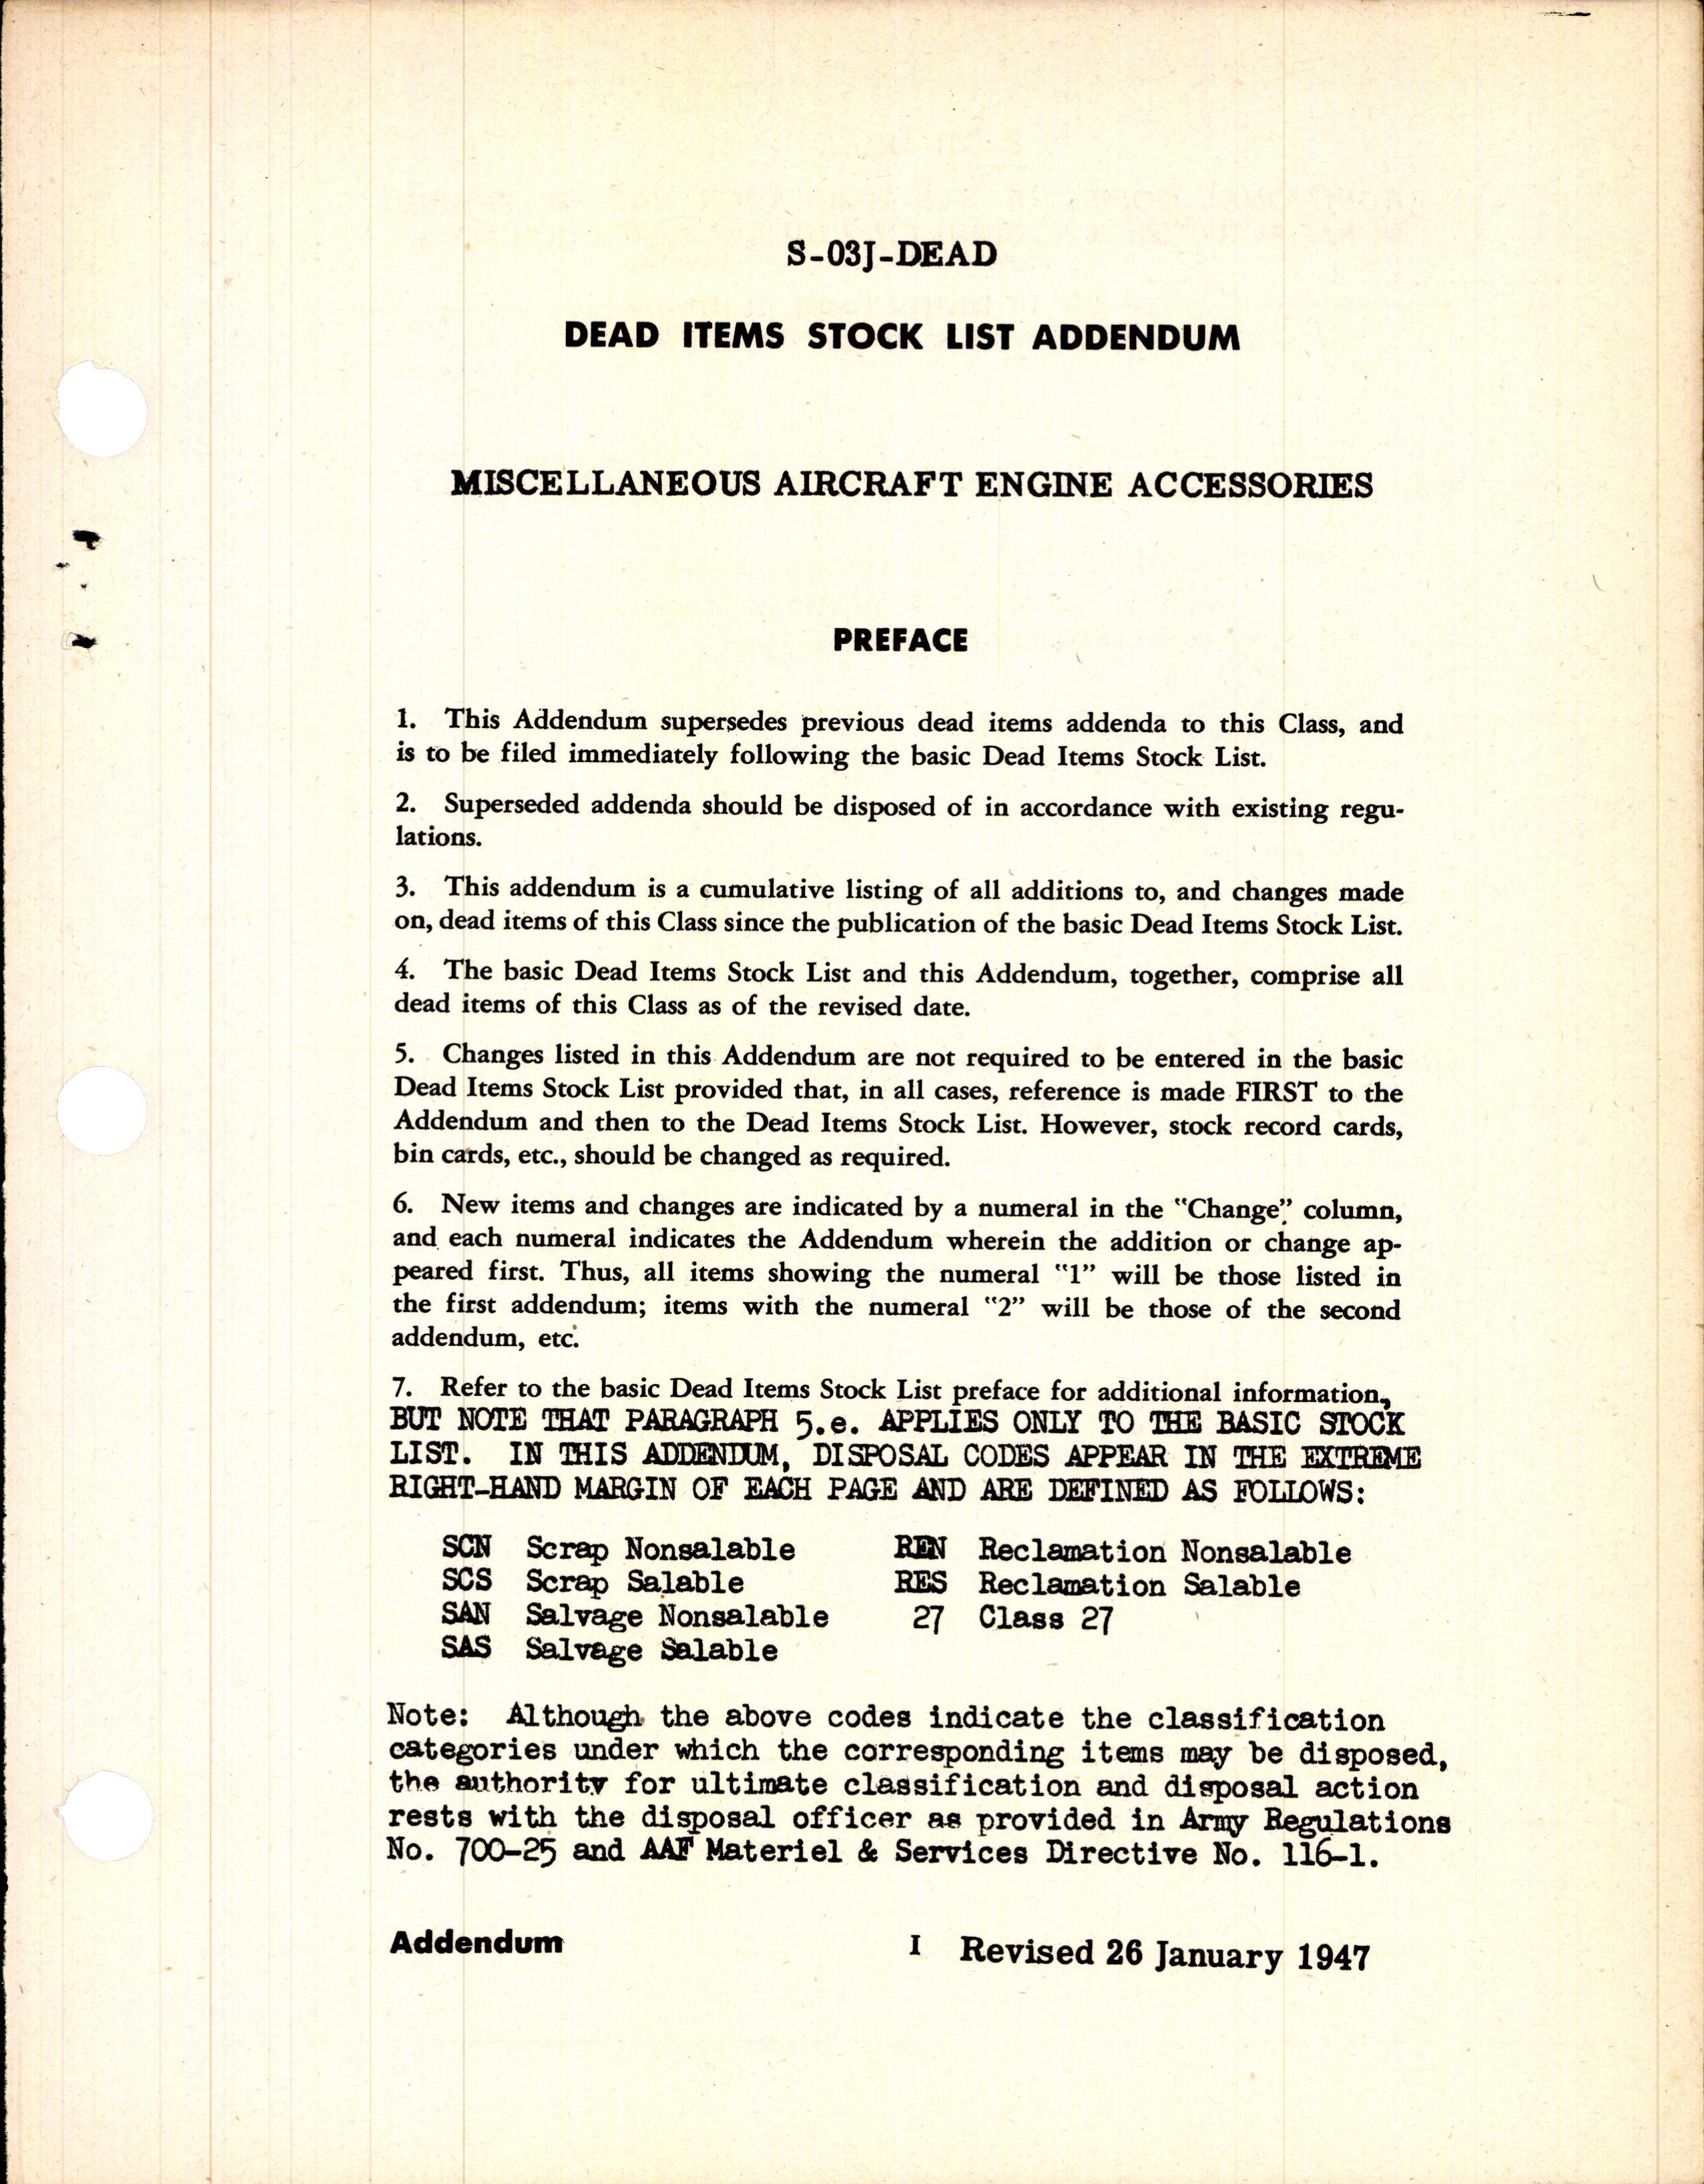 Sample page 3 from AirCorps Library document: Dead Items Stock List for Miscellaneous Aircraft Engine Accessories